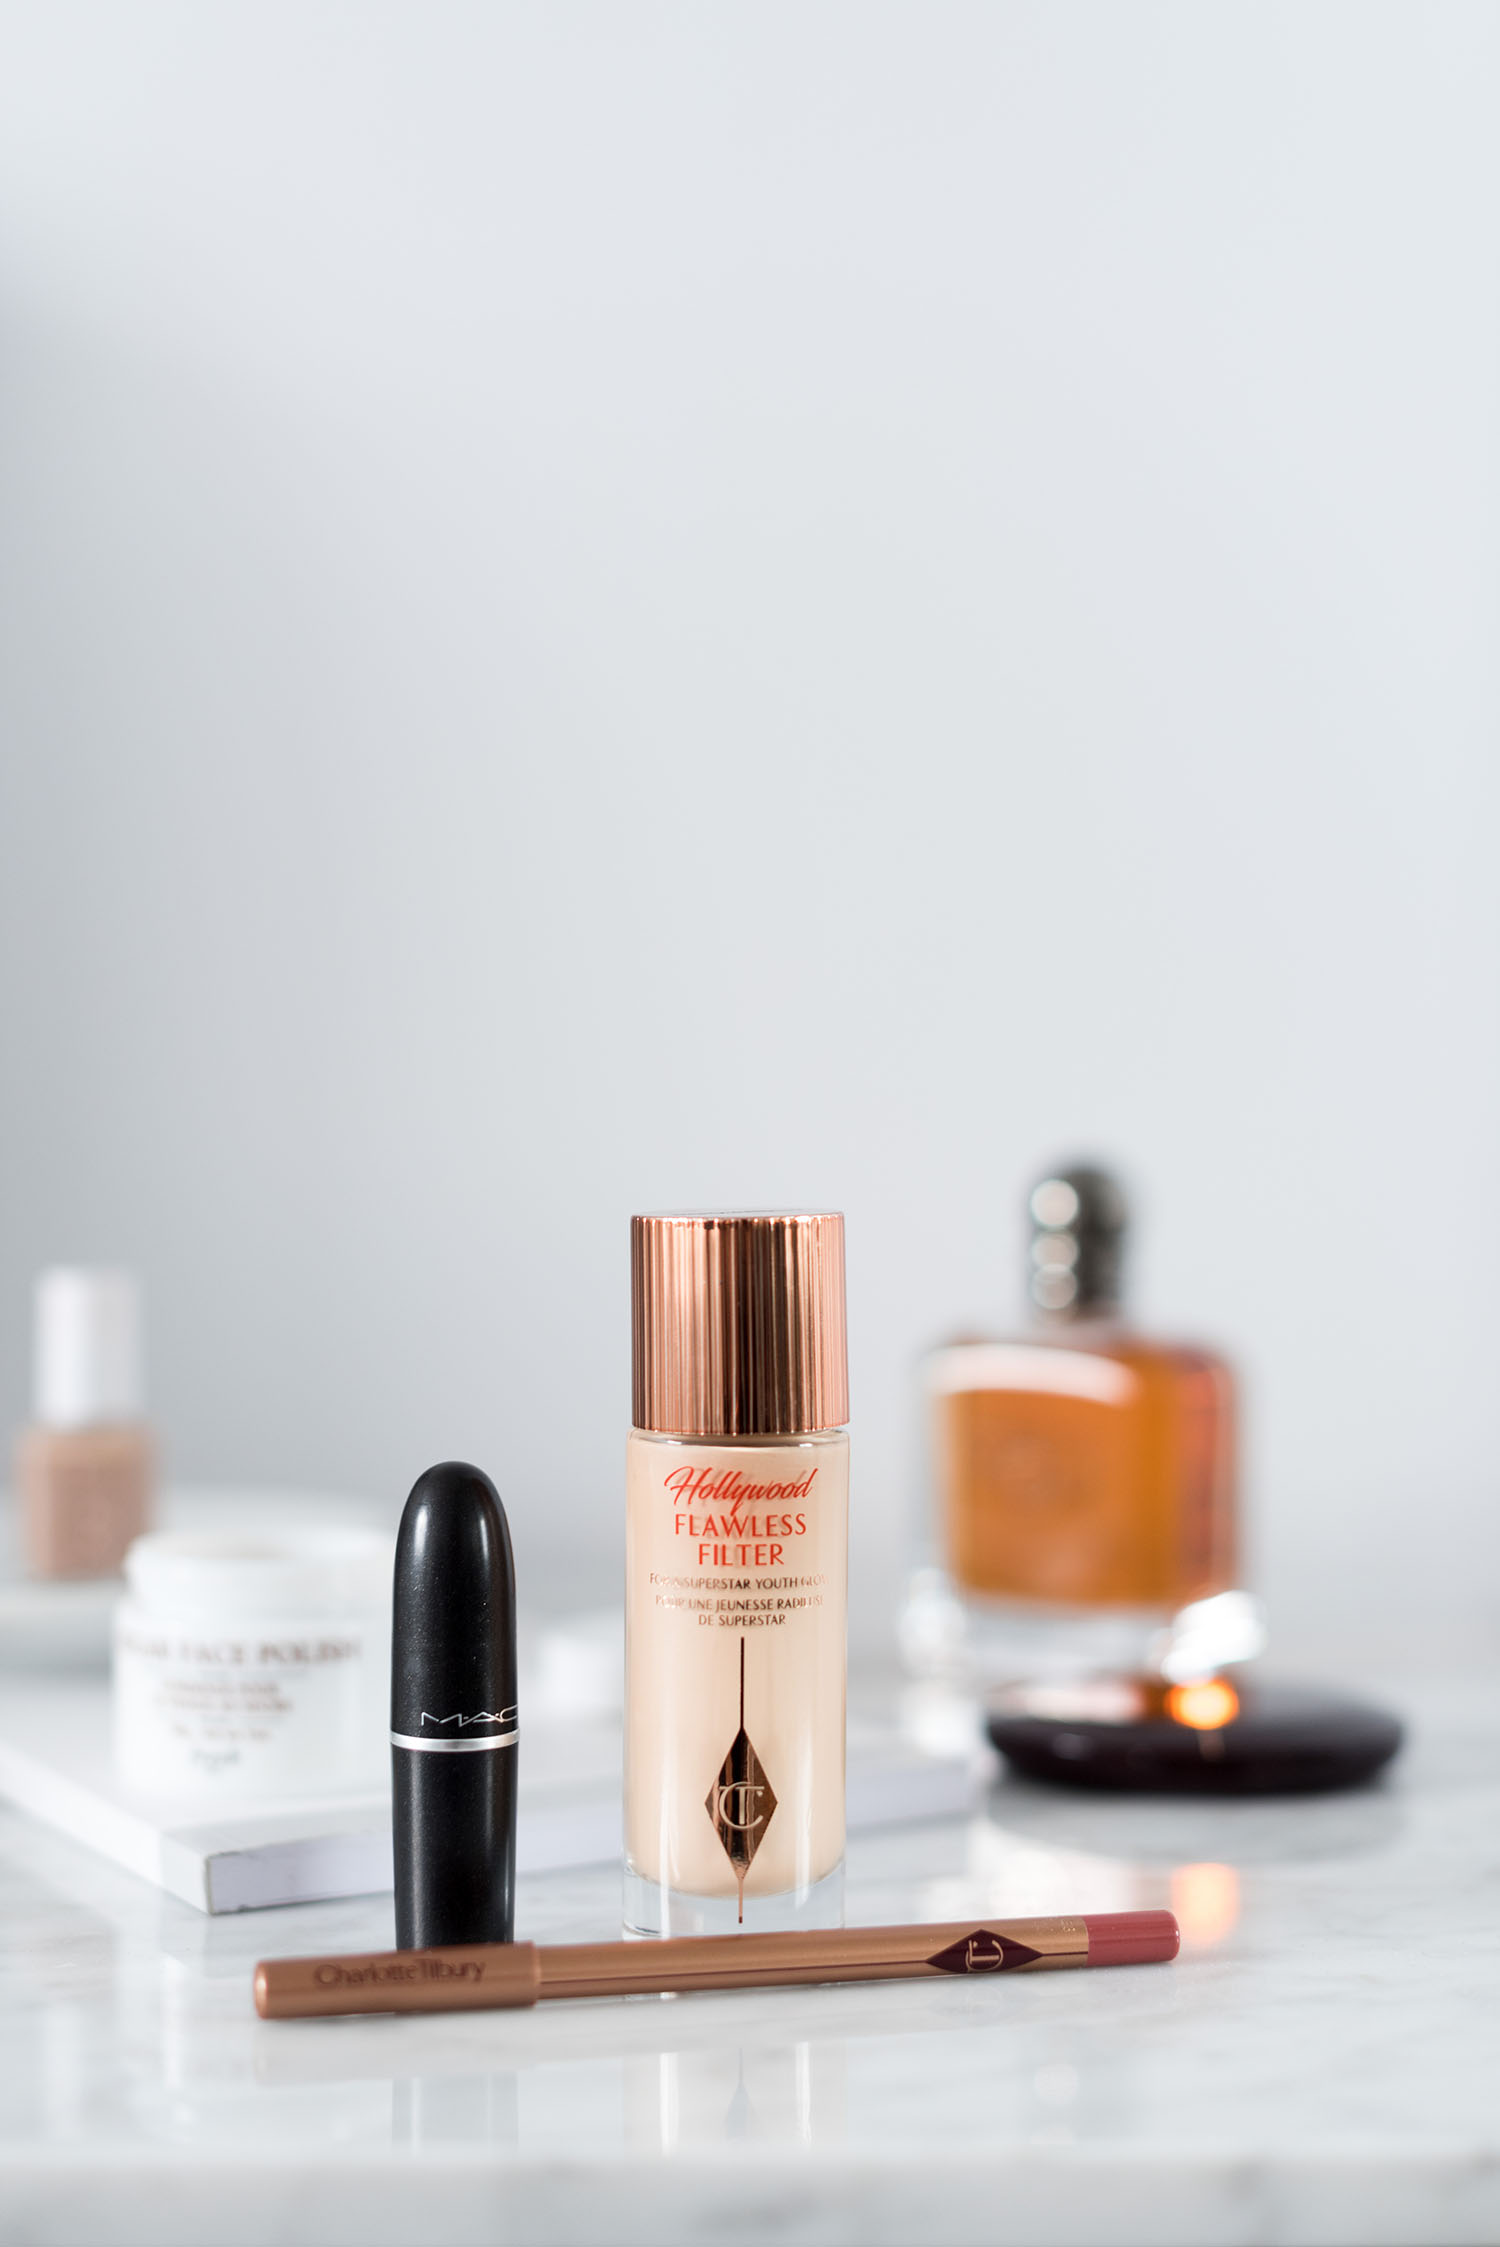 Charlotte Tilbury Hollywood Flawless Filter sits next to a MAC lipstick, as captured by top beauty blogger Cee Fardoe of Coco & Vera